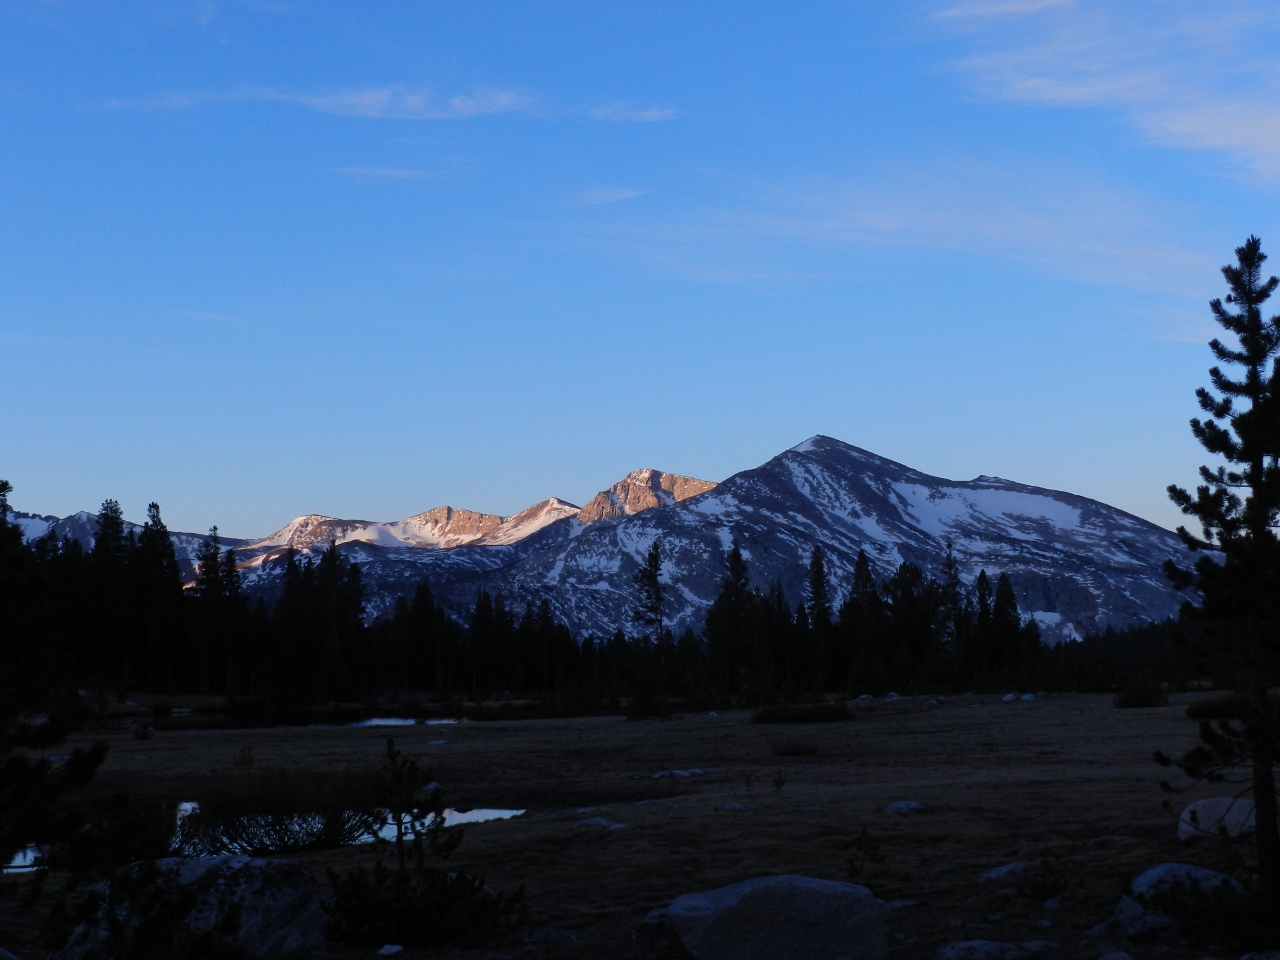 Early morning light from Tioga Pass